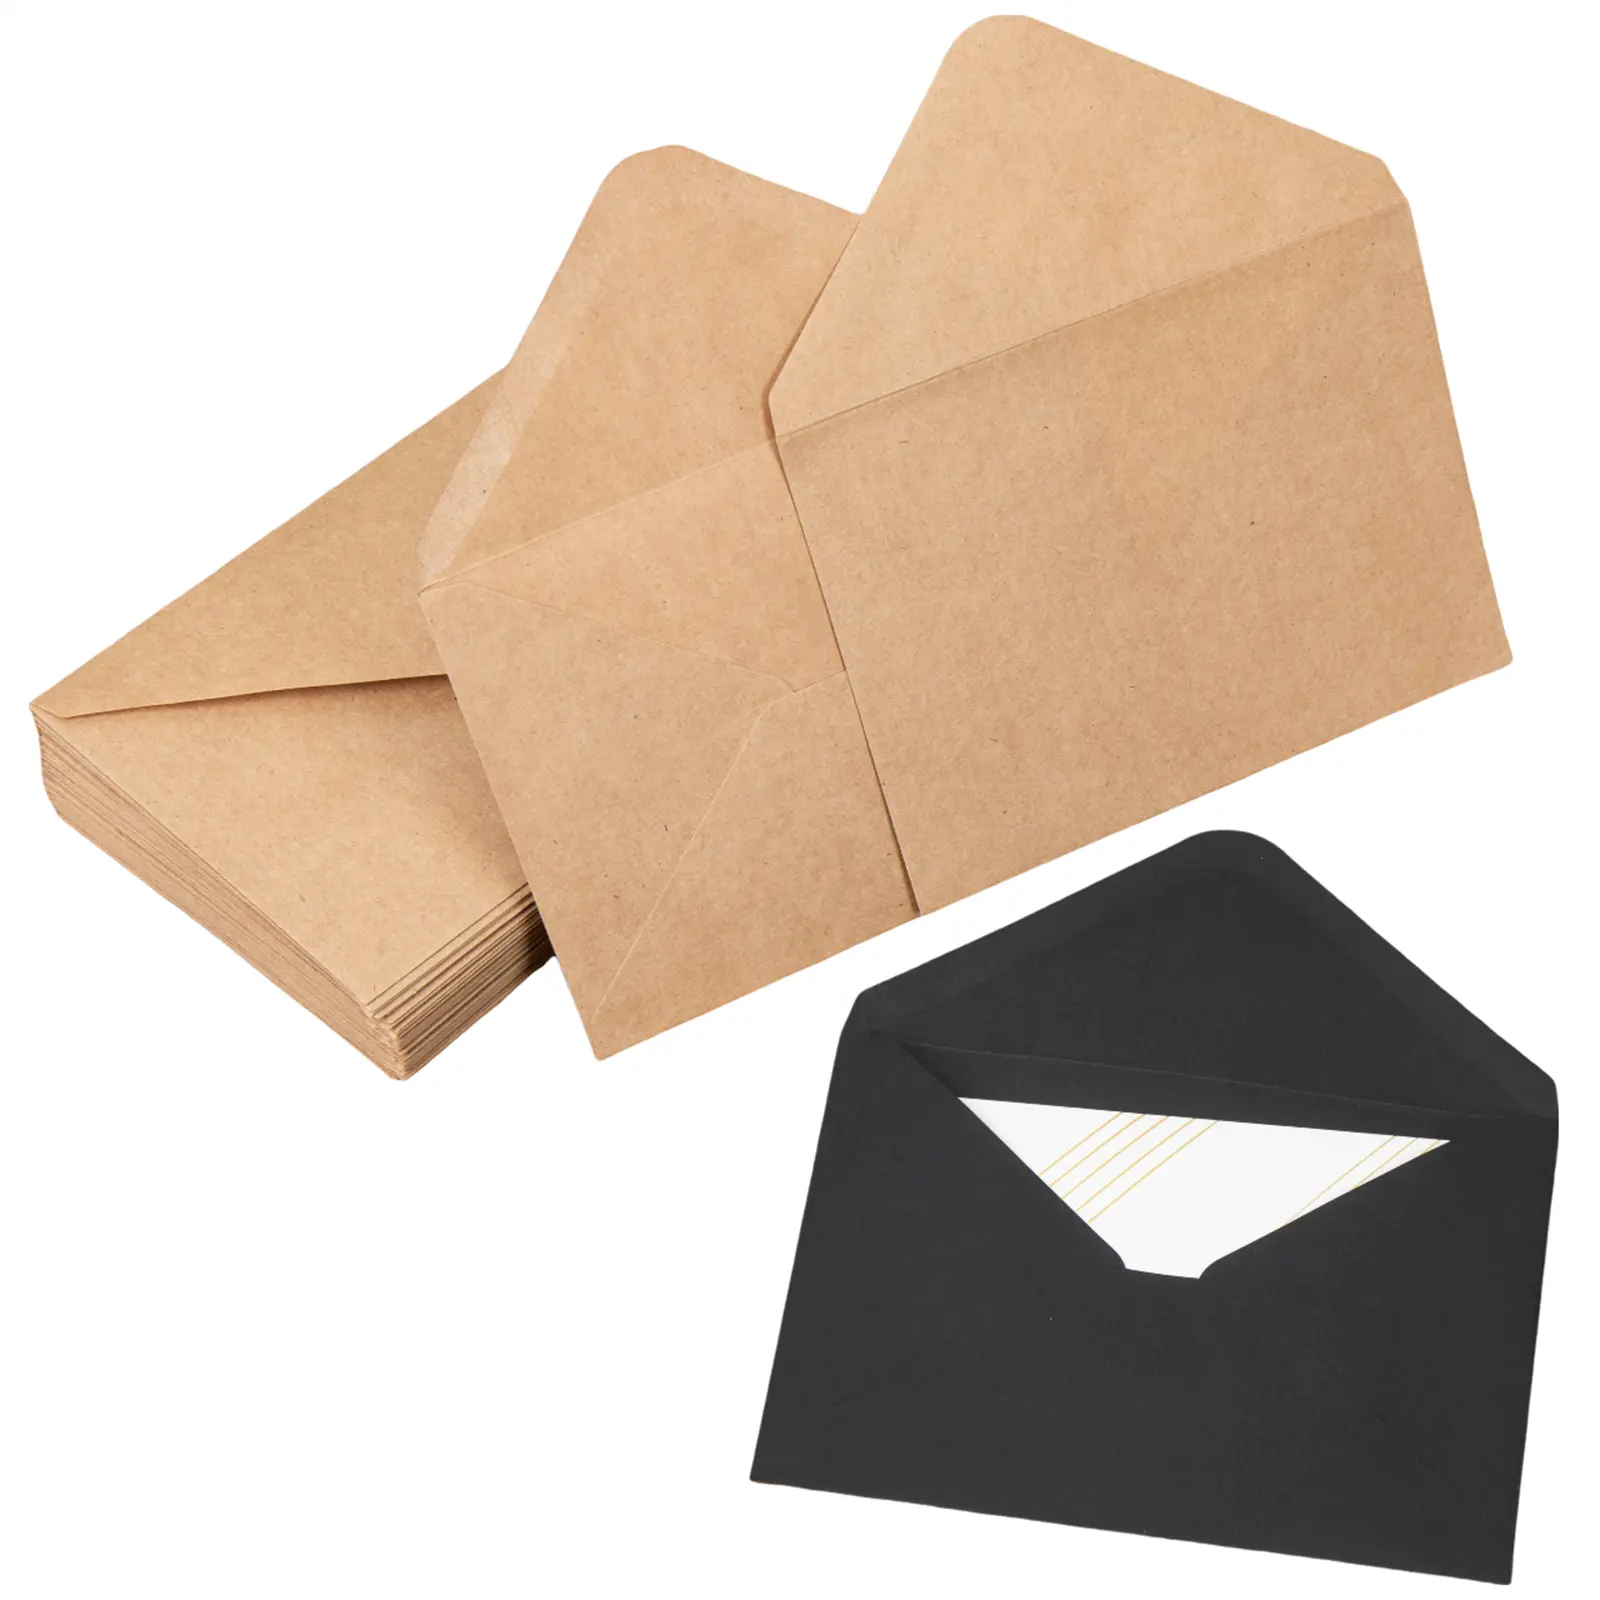 10x7 cm Small Water Self-adhesive Brown Black Colorful Eco-friendly Kraft Paper Storage Packet Bag for Mini Cash Envelopes